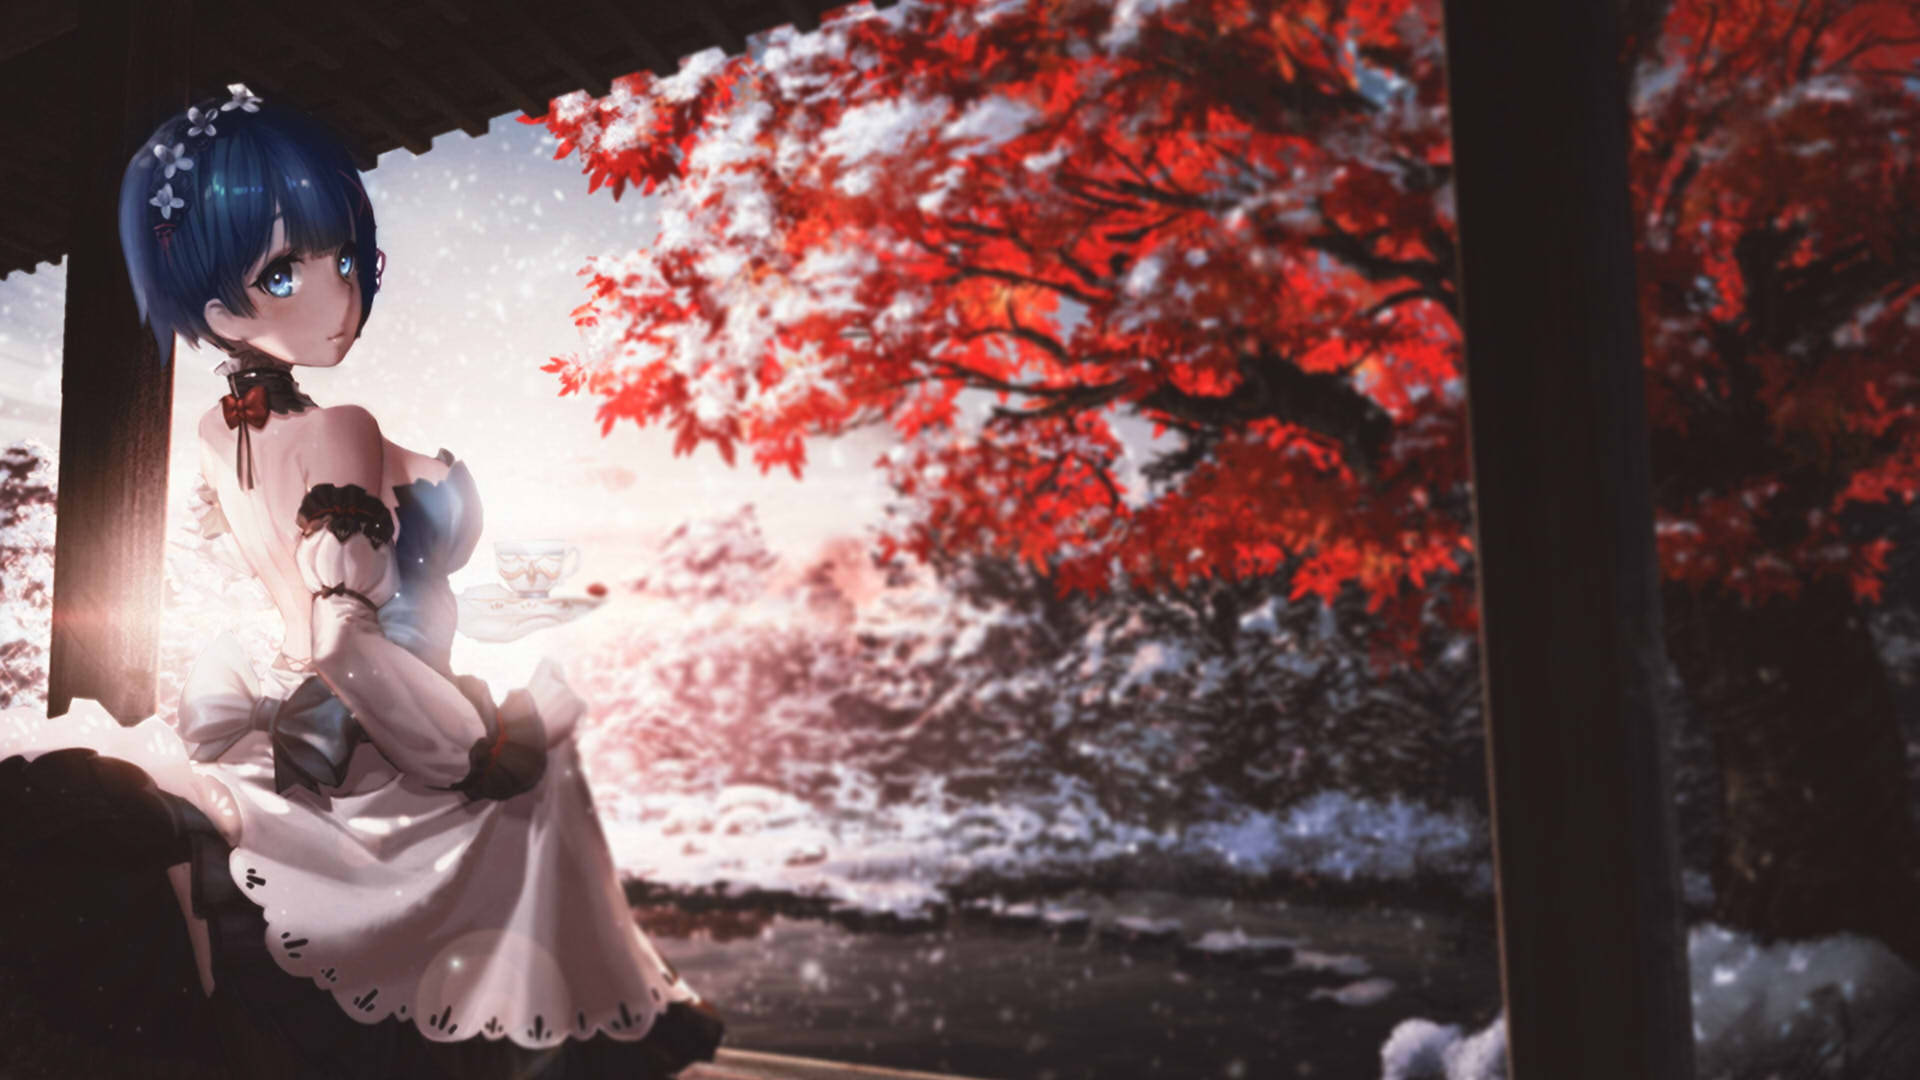 Animated Rem And Red Leaves In Winter Background